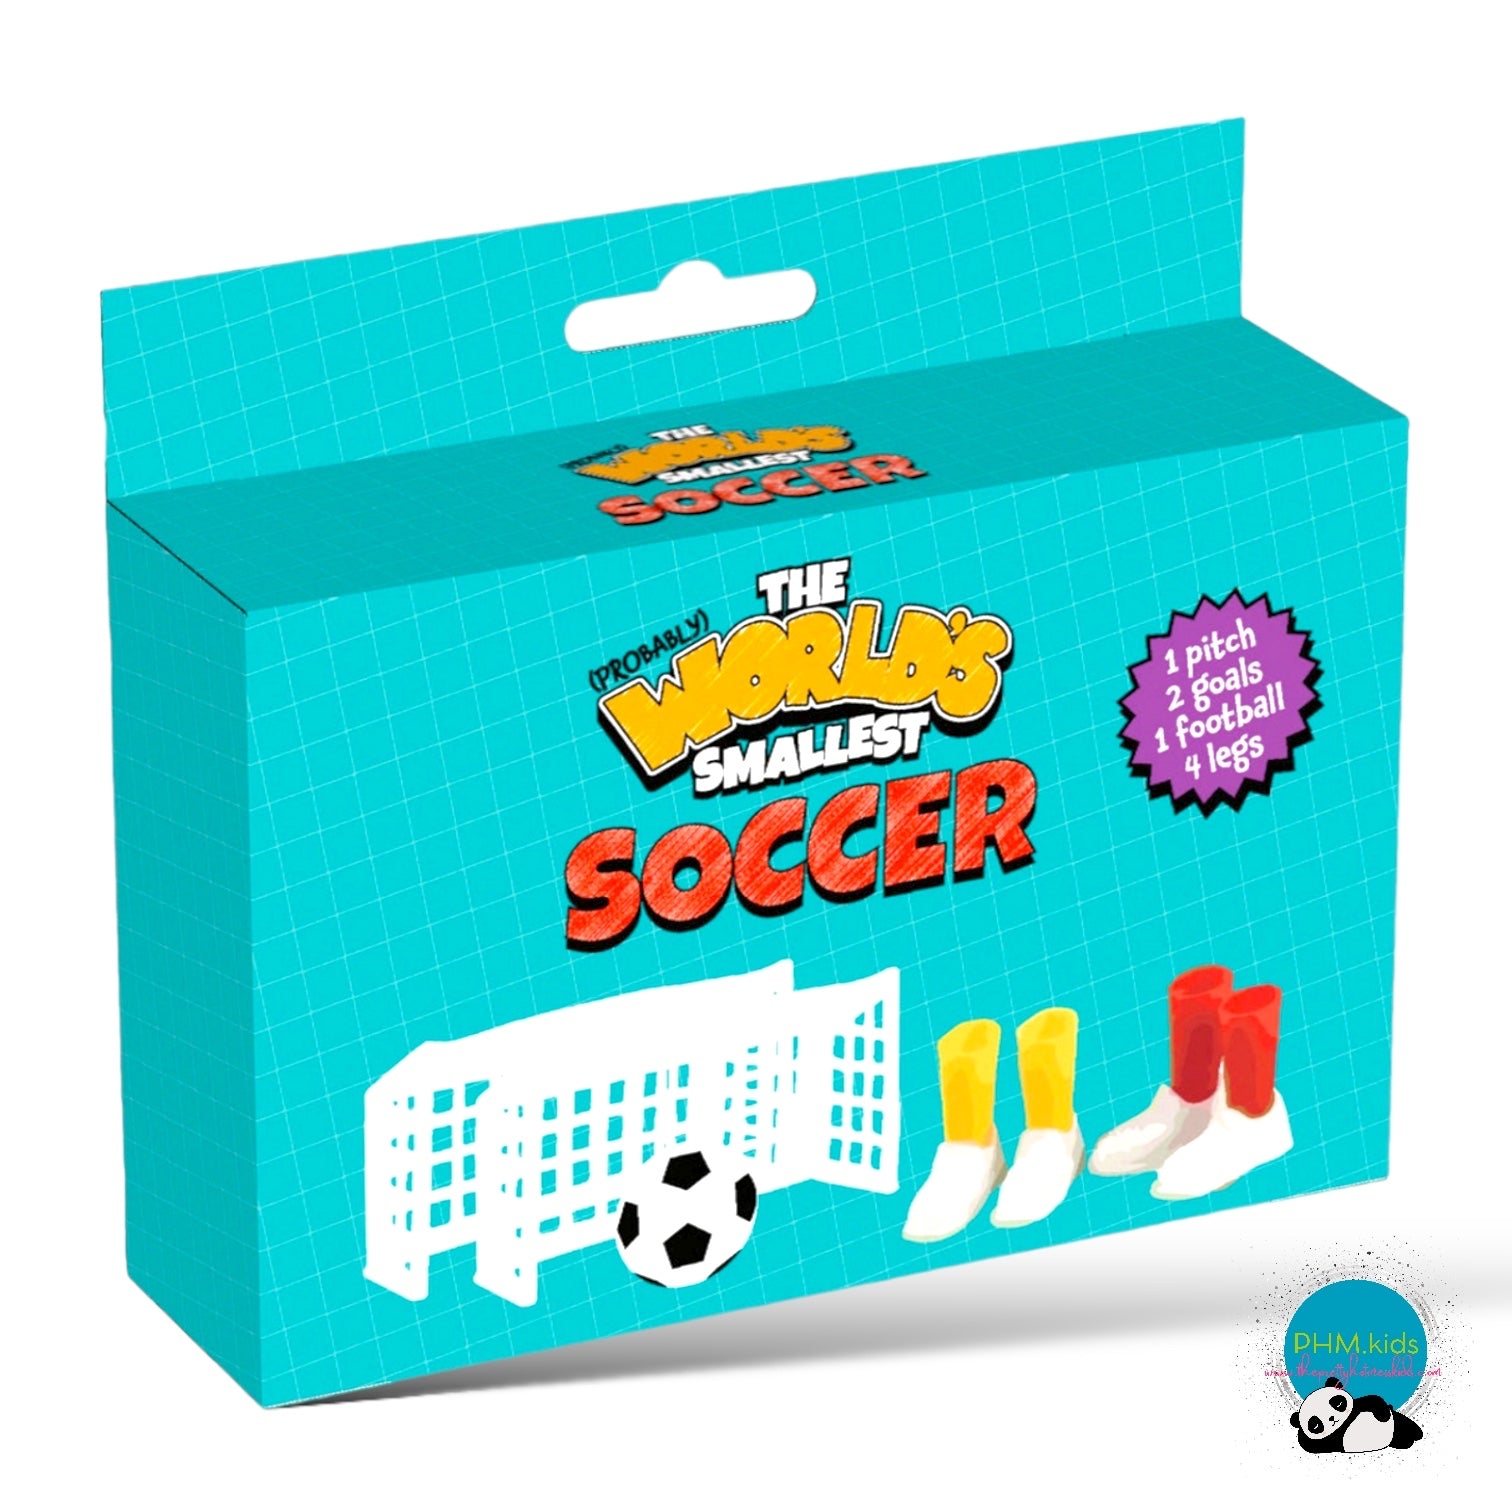 Probably the World's Smallest Soccer Game